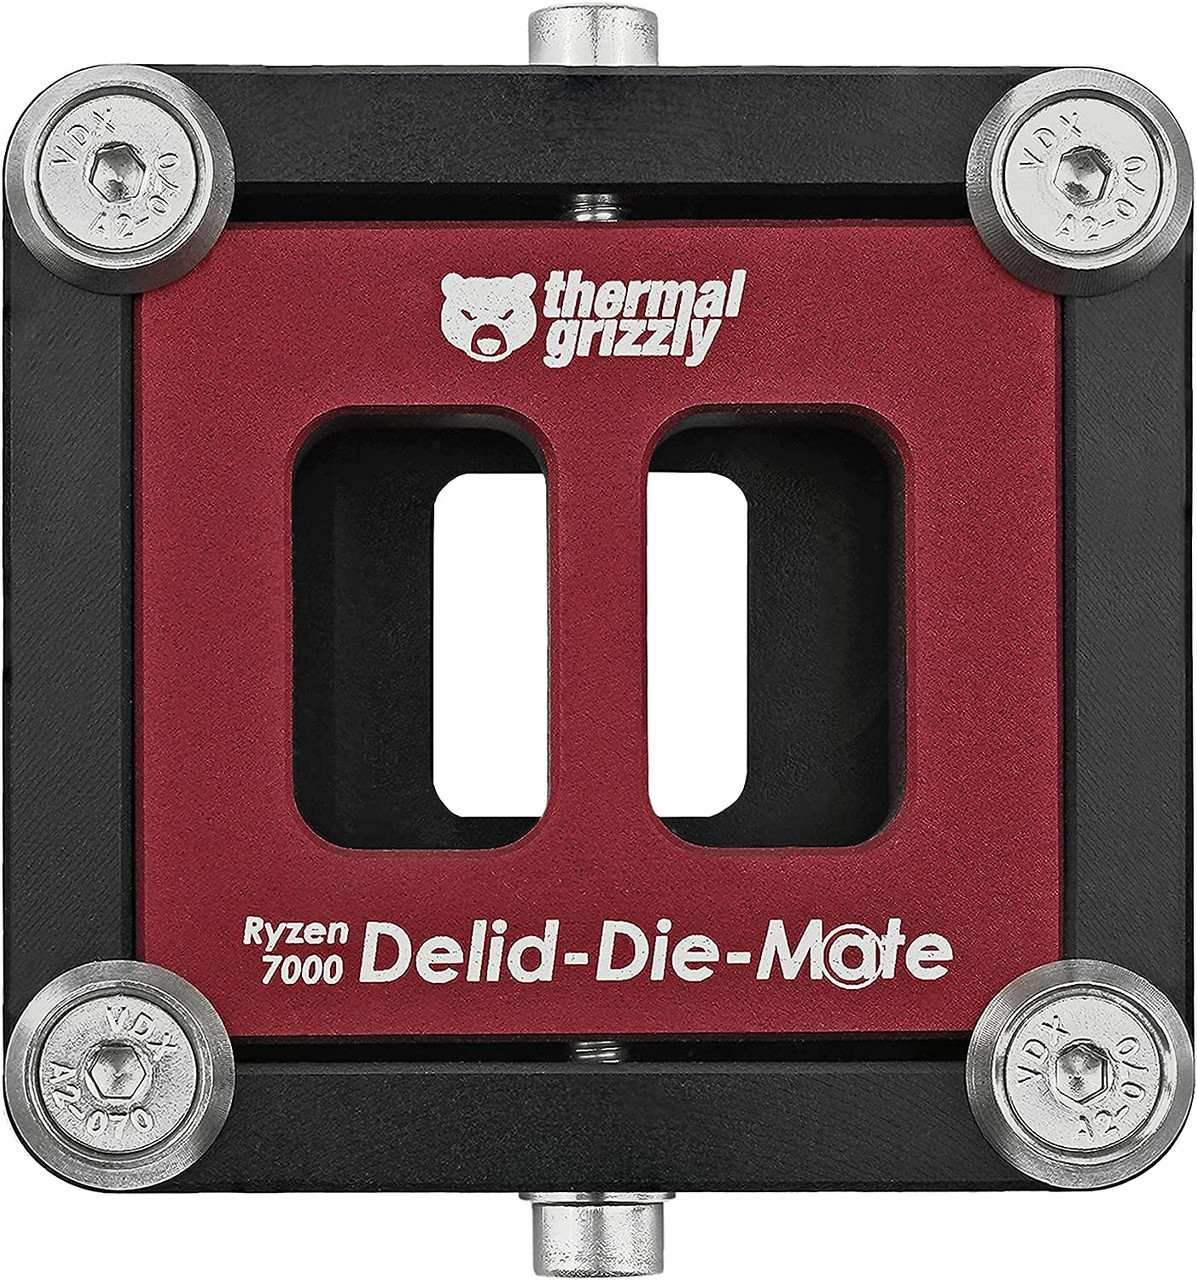 Thermal Grizzly Ryzen 7000 Delid-Die-Mate CPU Delid Tool for RYZEN 7000 Series (TG-DDM-R7000-R)